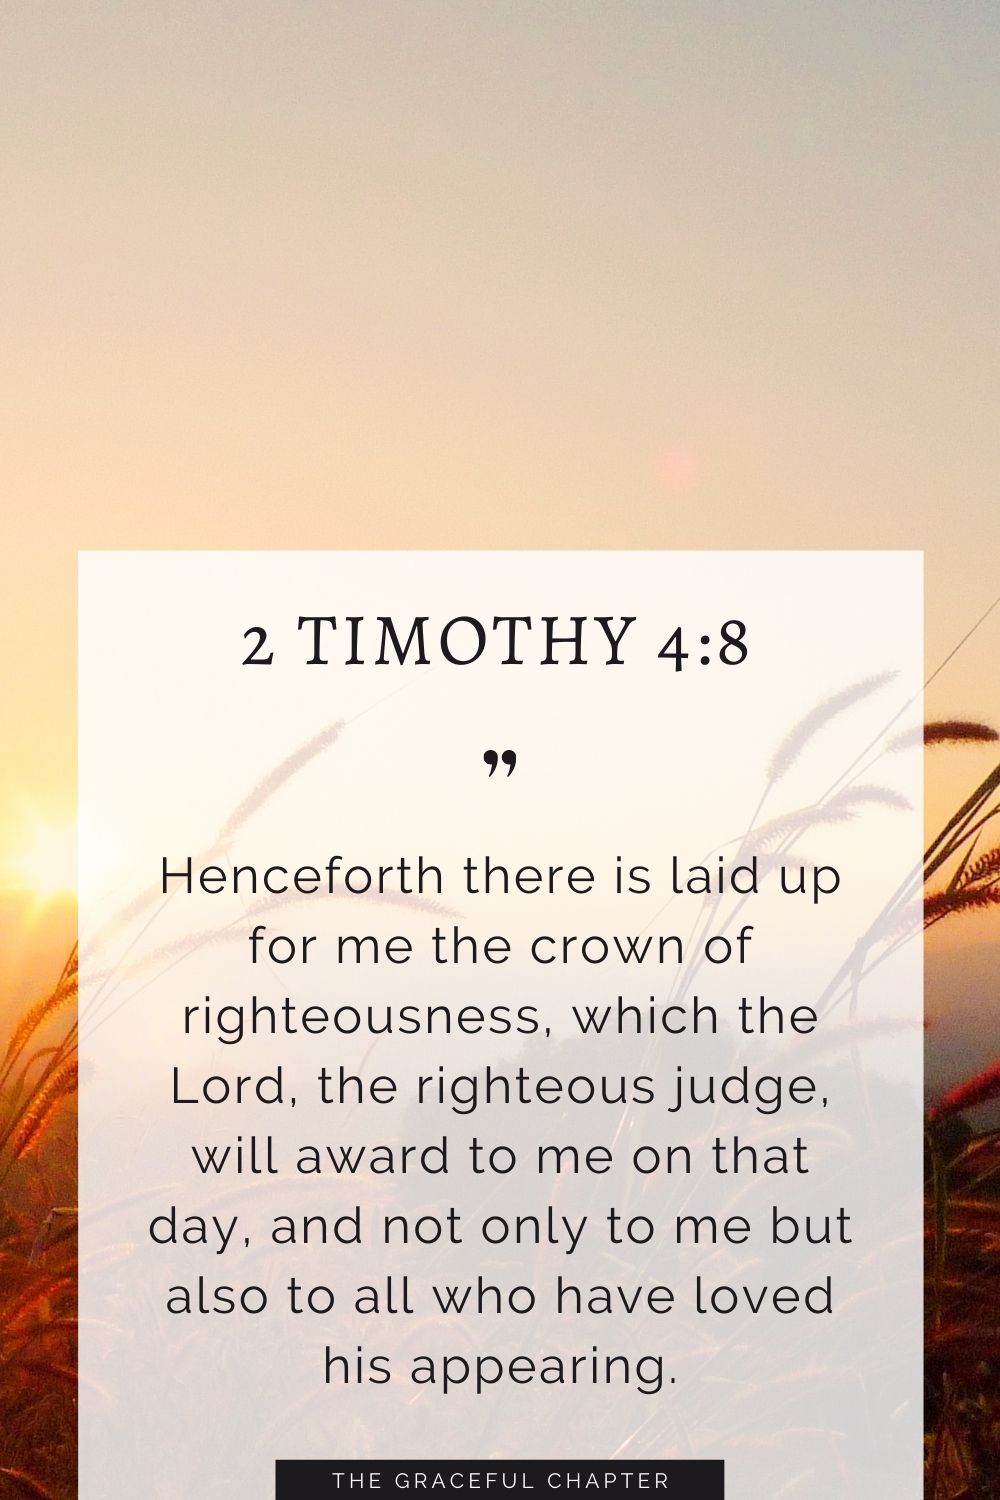 Henceforth there is laid up for me the crown of righteousness, which the Lord, the righteous judge, will award to me on that day, and not only to me but also to all who have loved his appearing. 2 Timothy 4:8